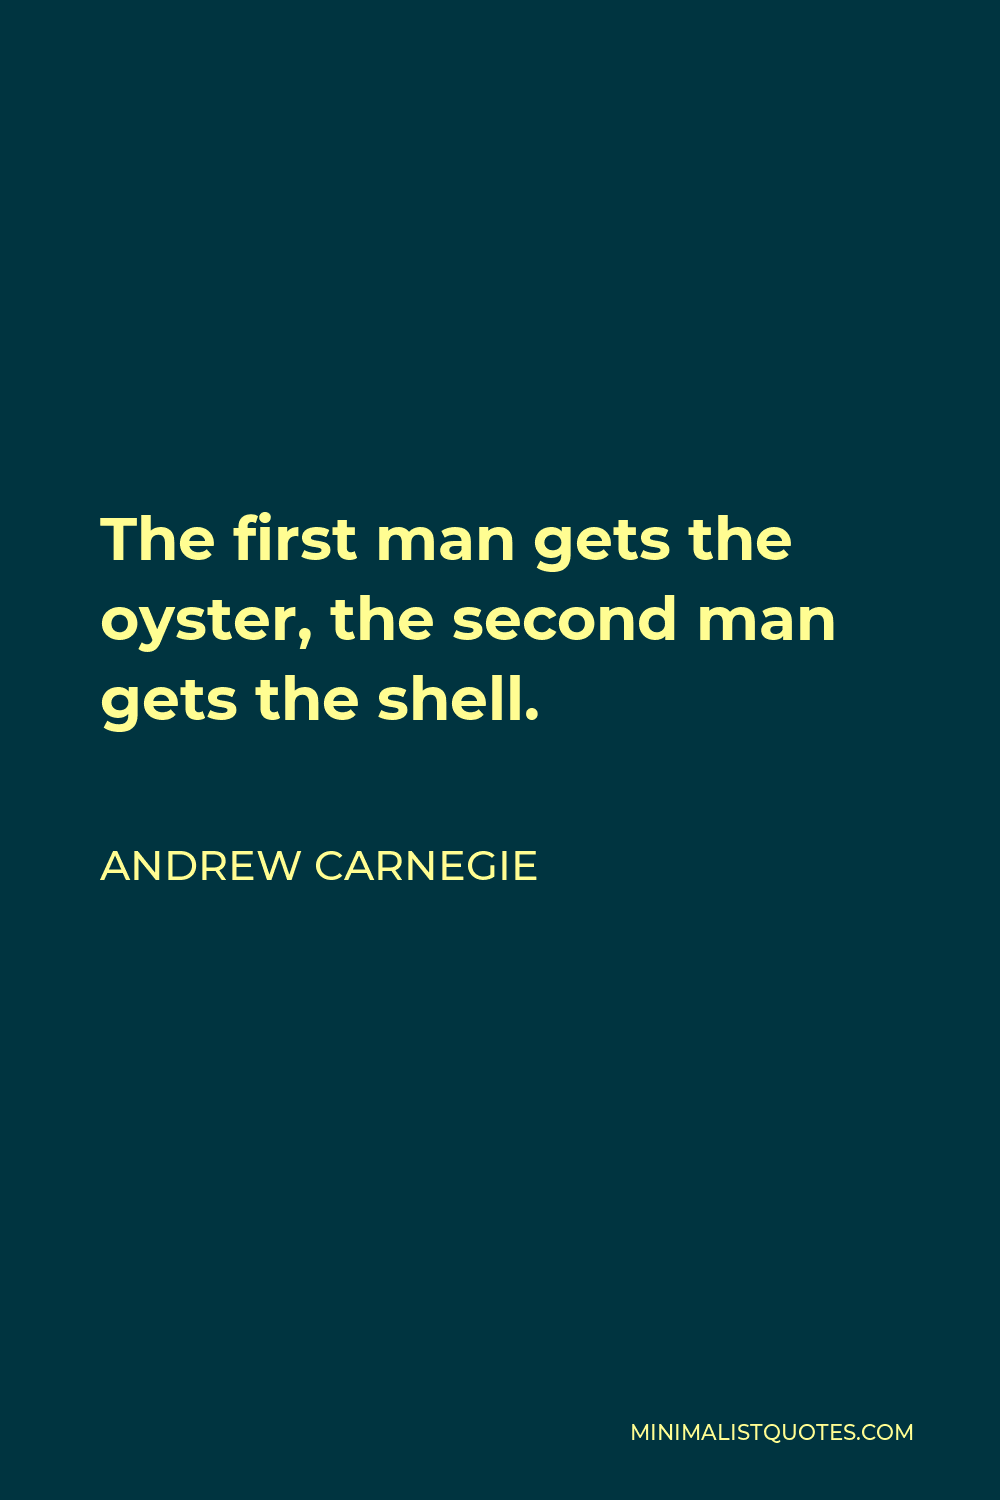 Andrew Carnegie Quote - The first man gets the oyster, the second man gets the shell.